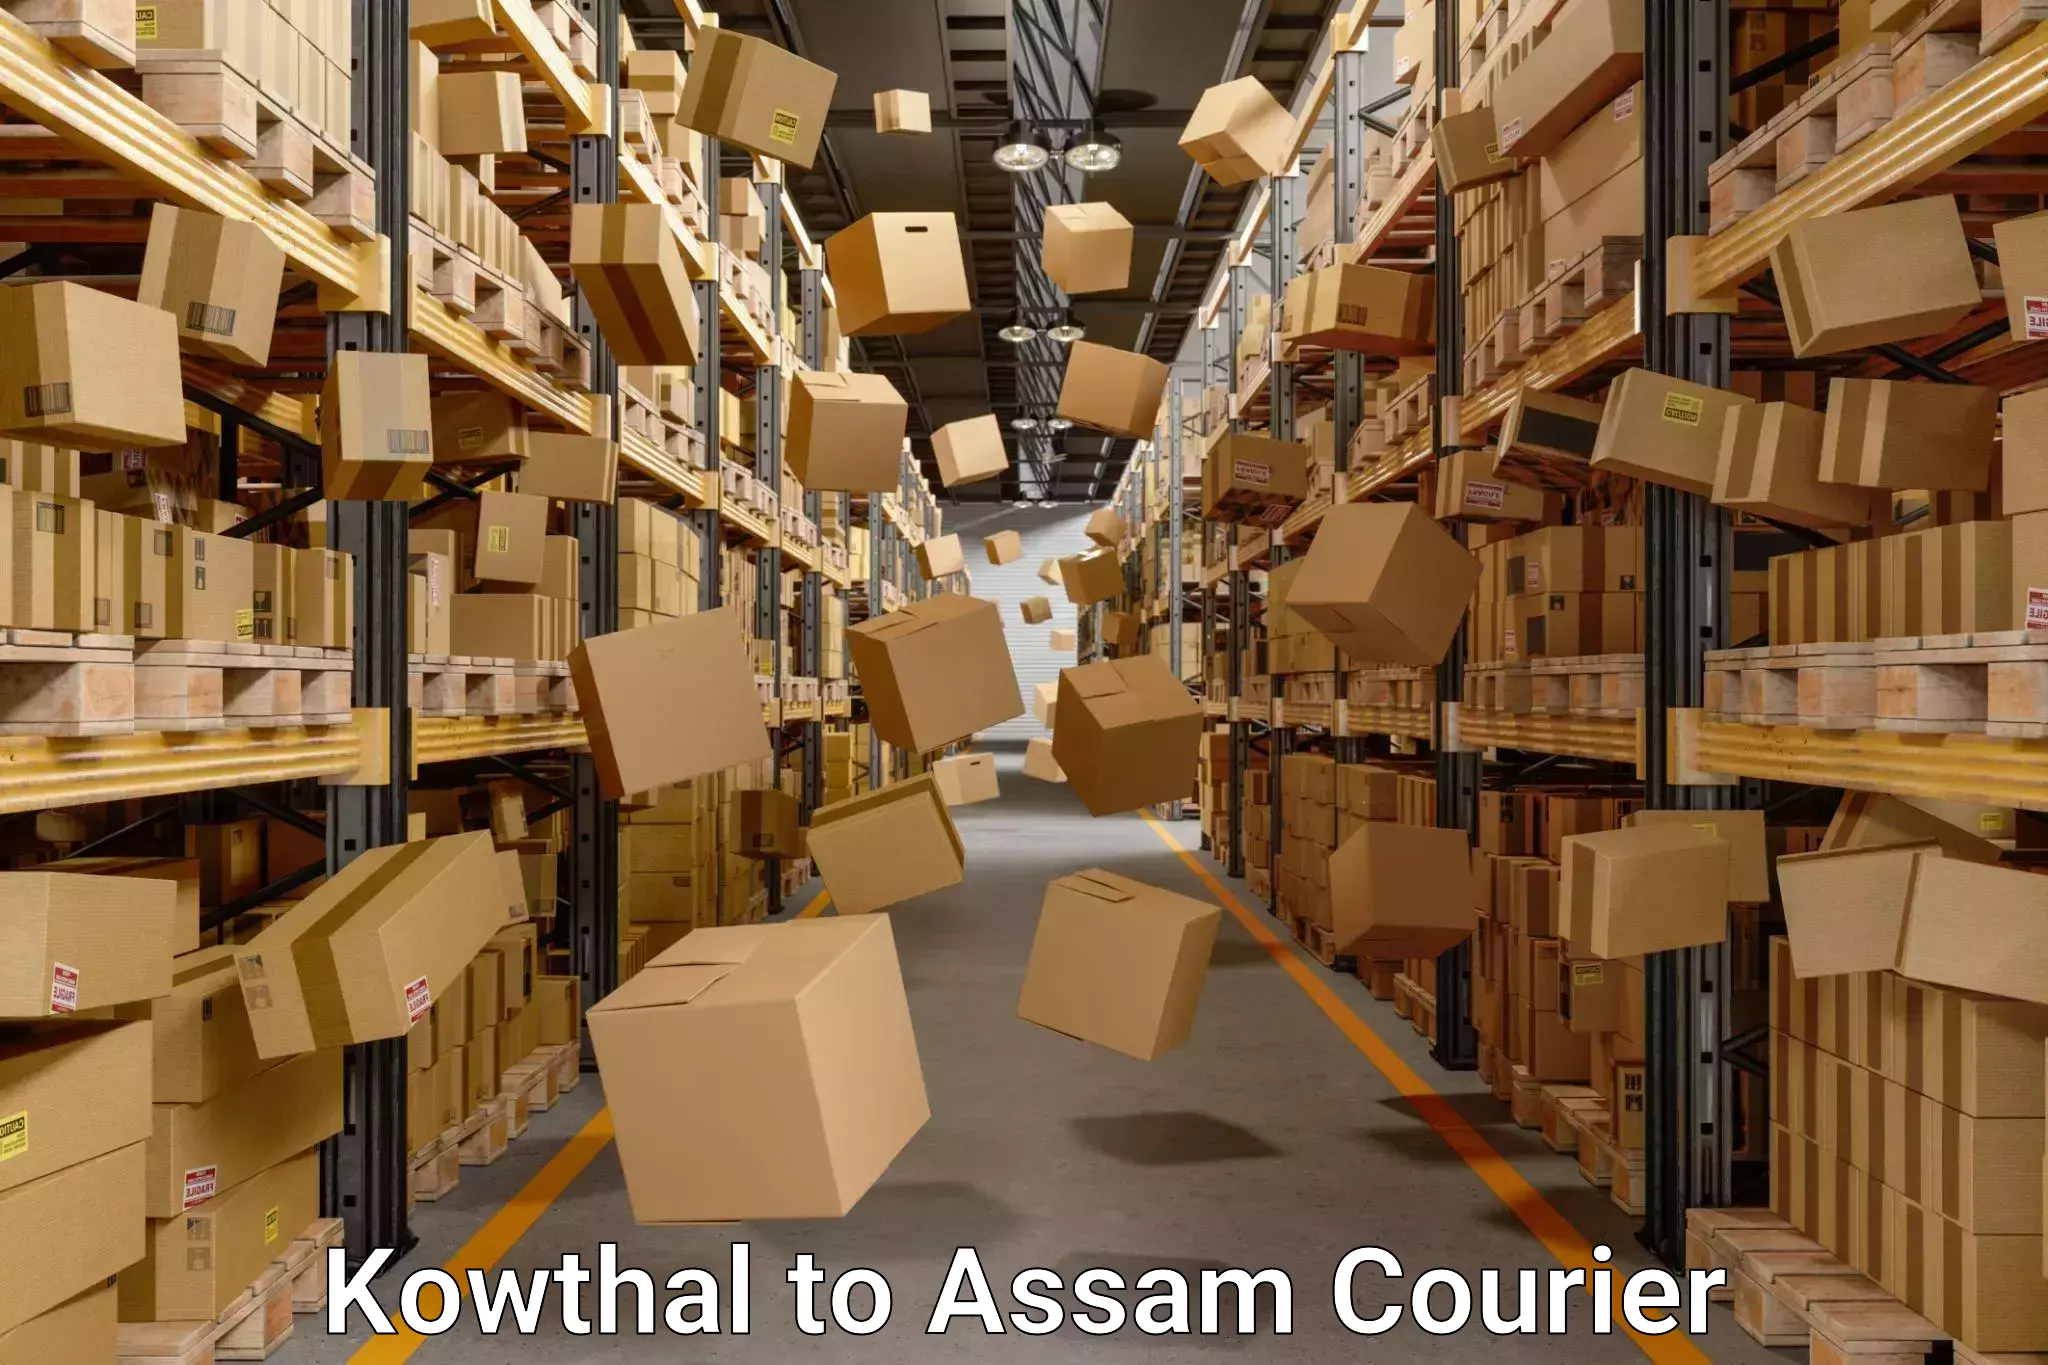 Home shifting services Kowthal to Lala Assam